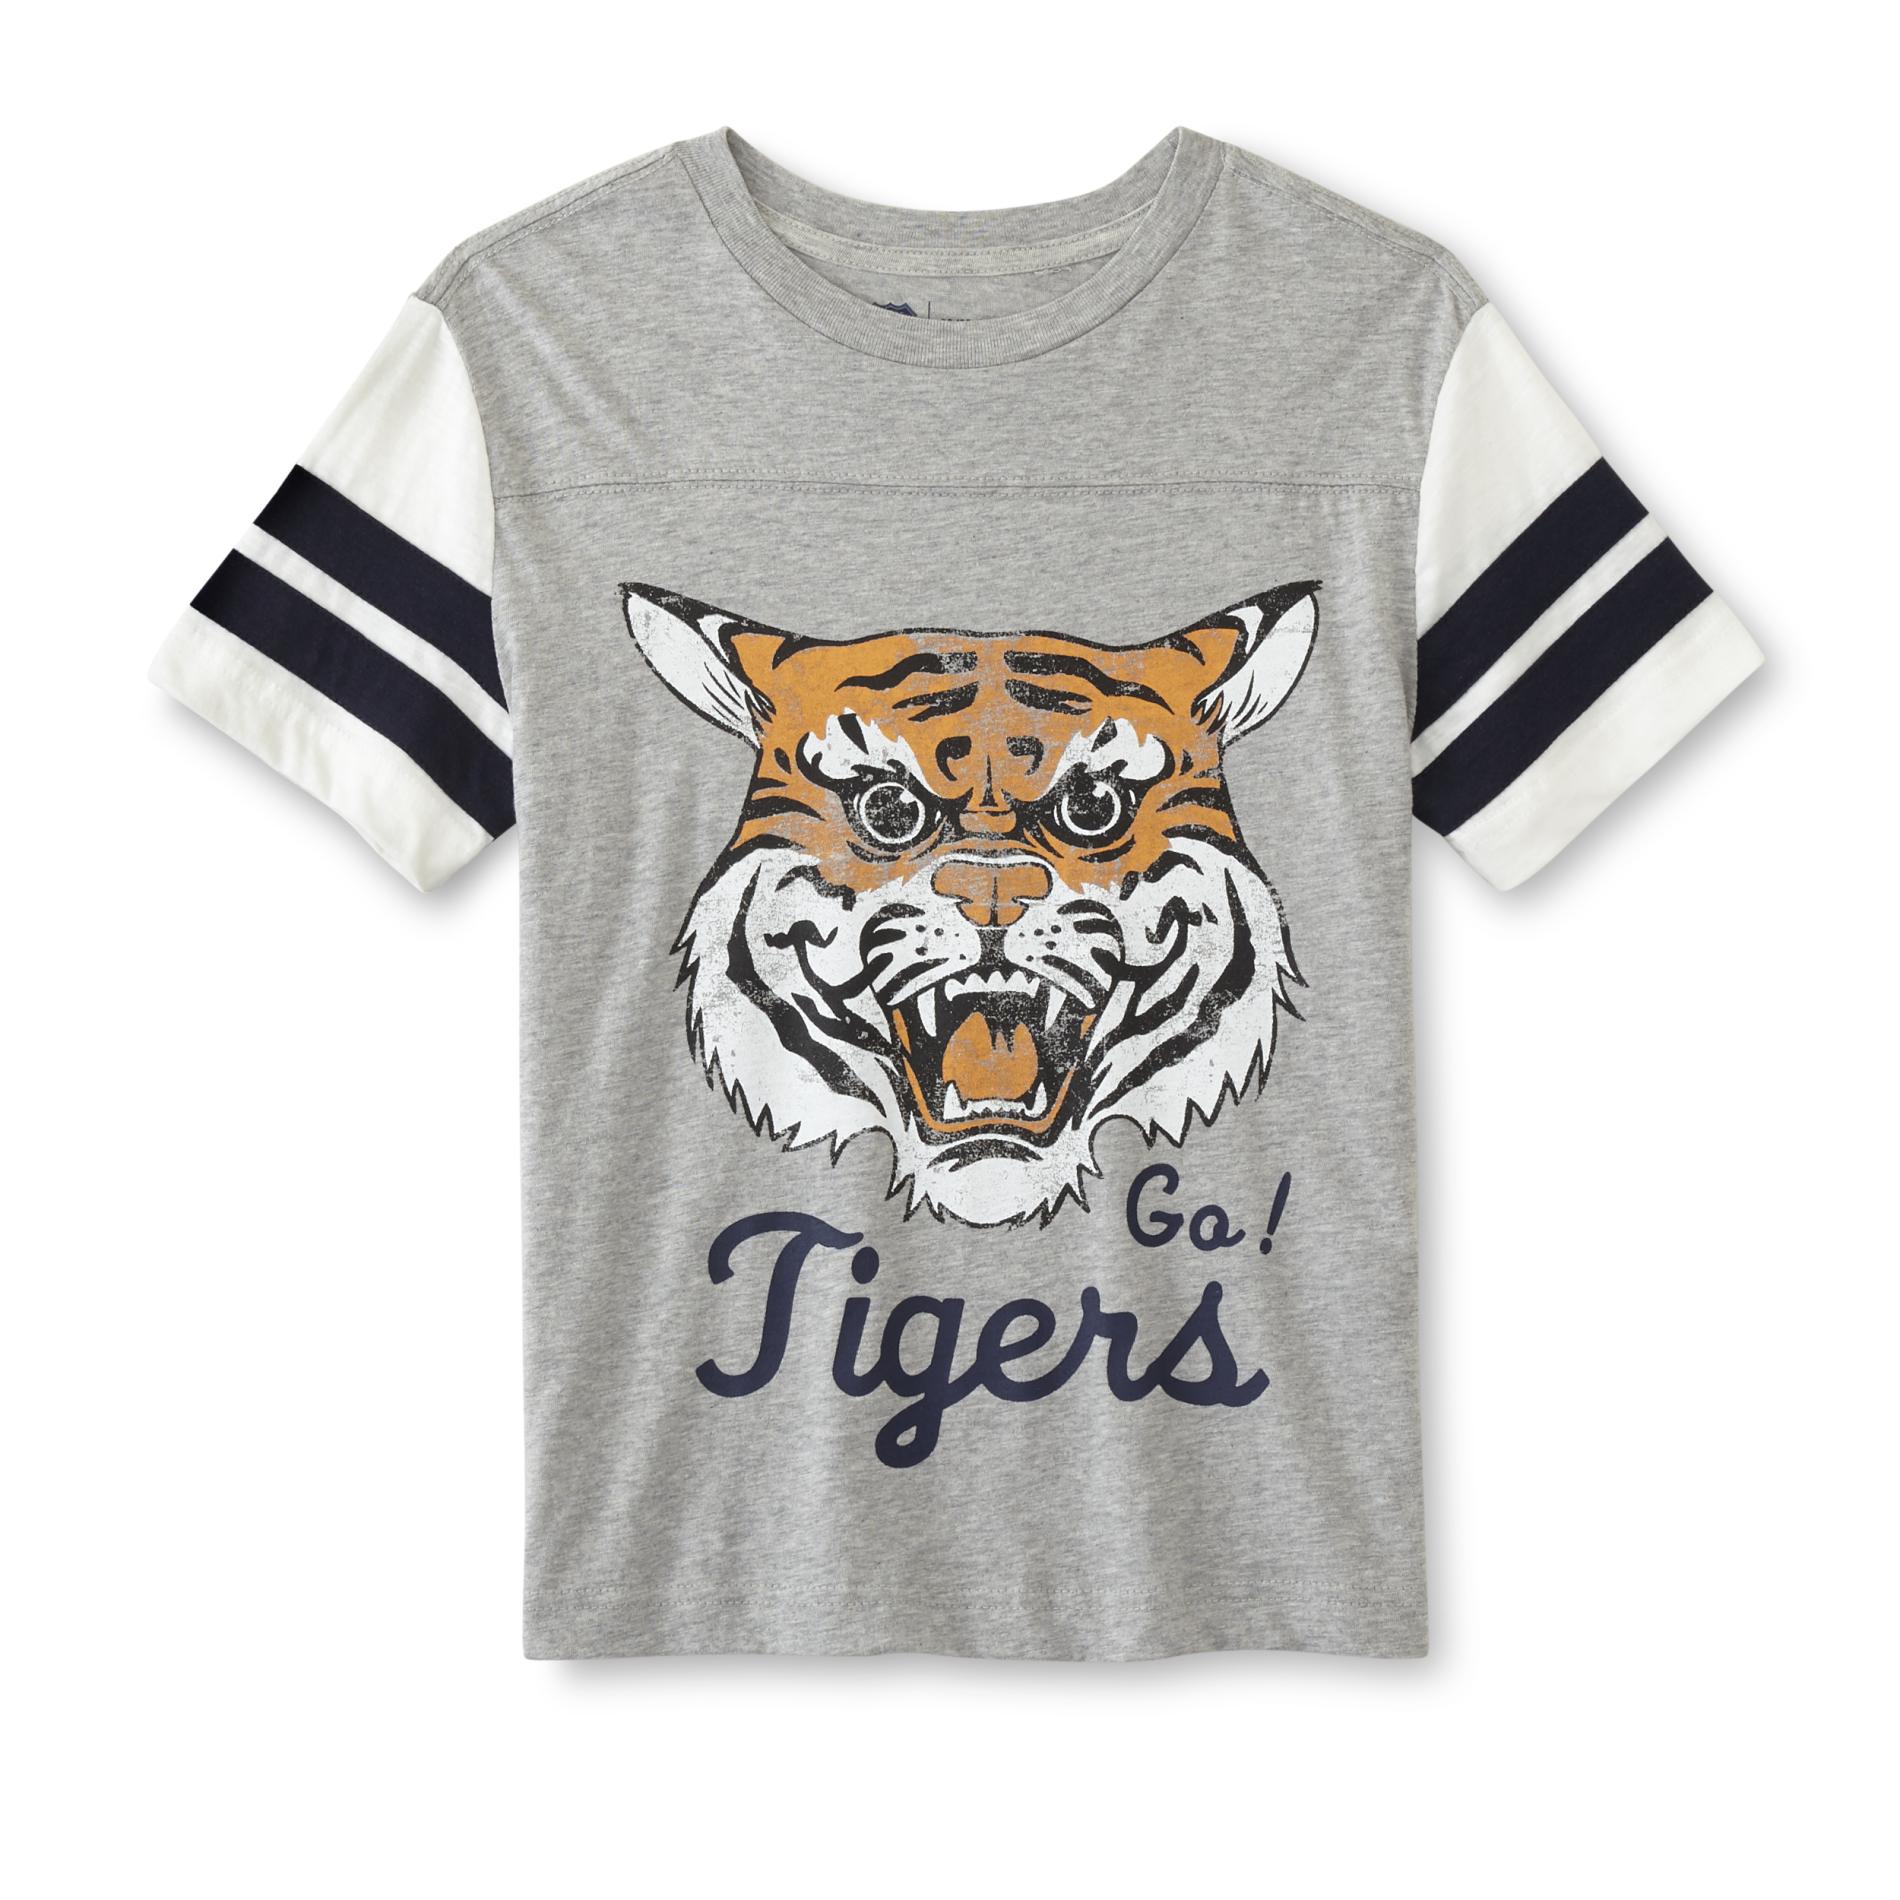 Route 66 Boys' Ringer T-Shirt - Go Tigers